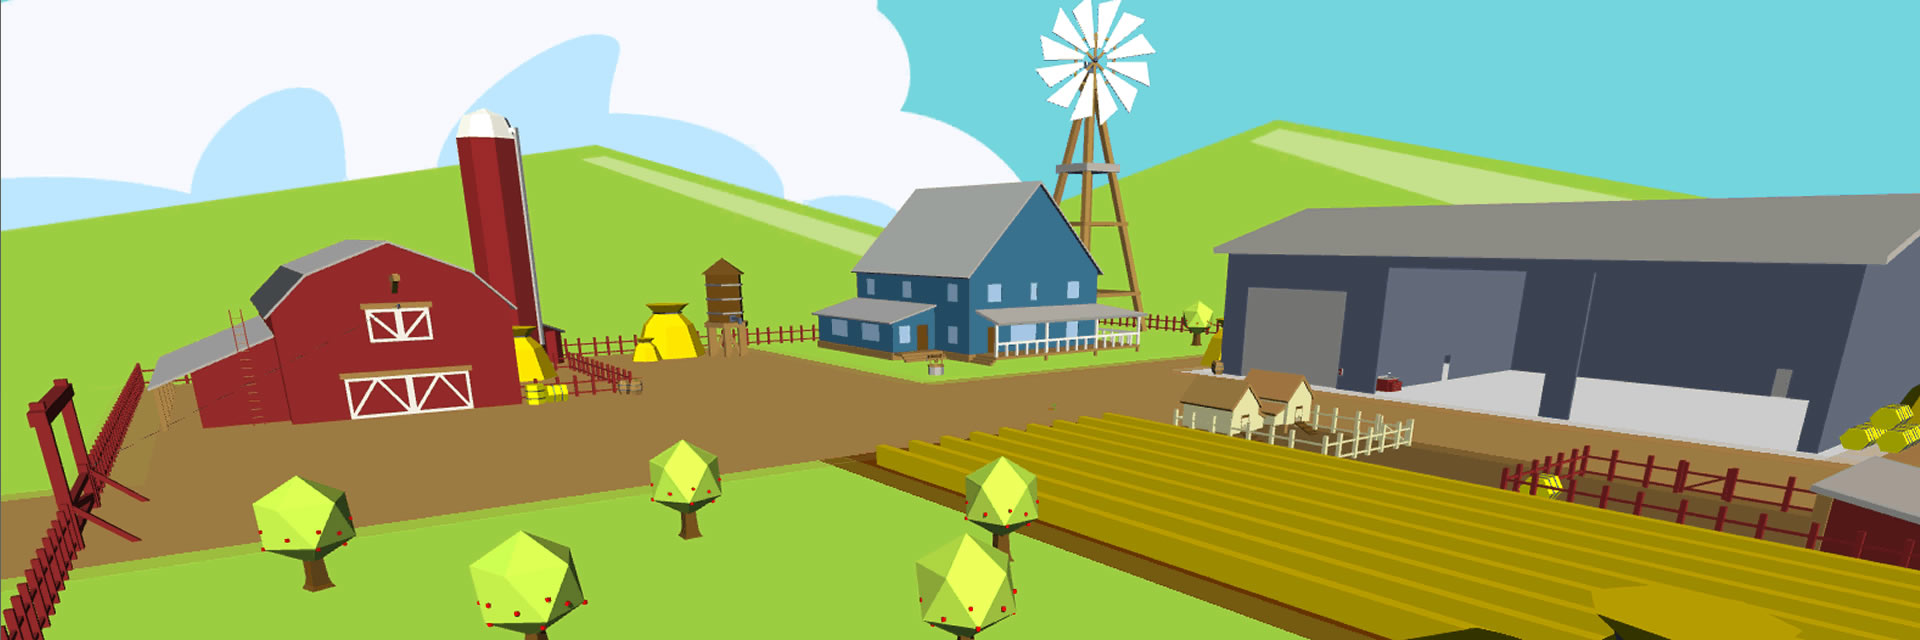 a view of the farm yard example scene from VRTK version 4